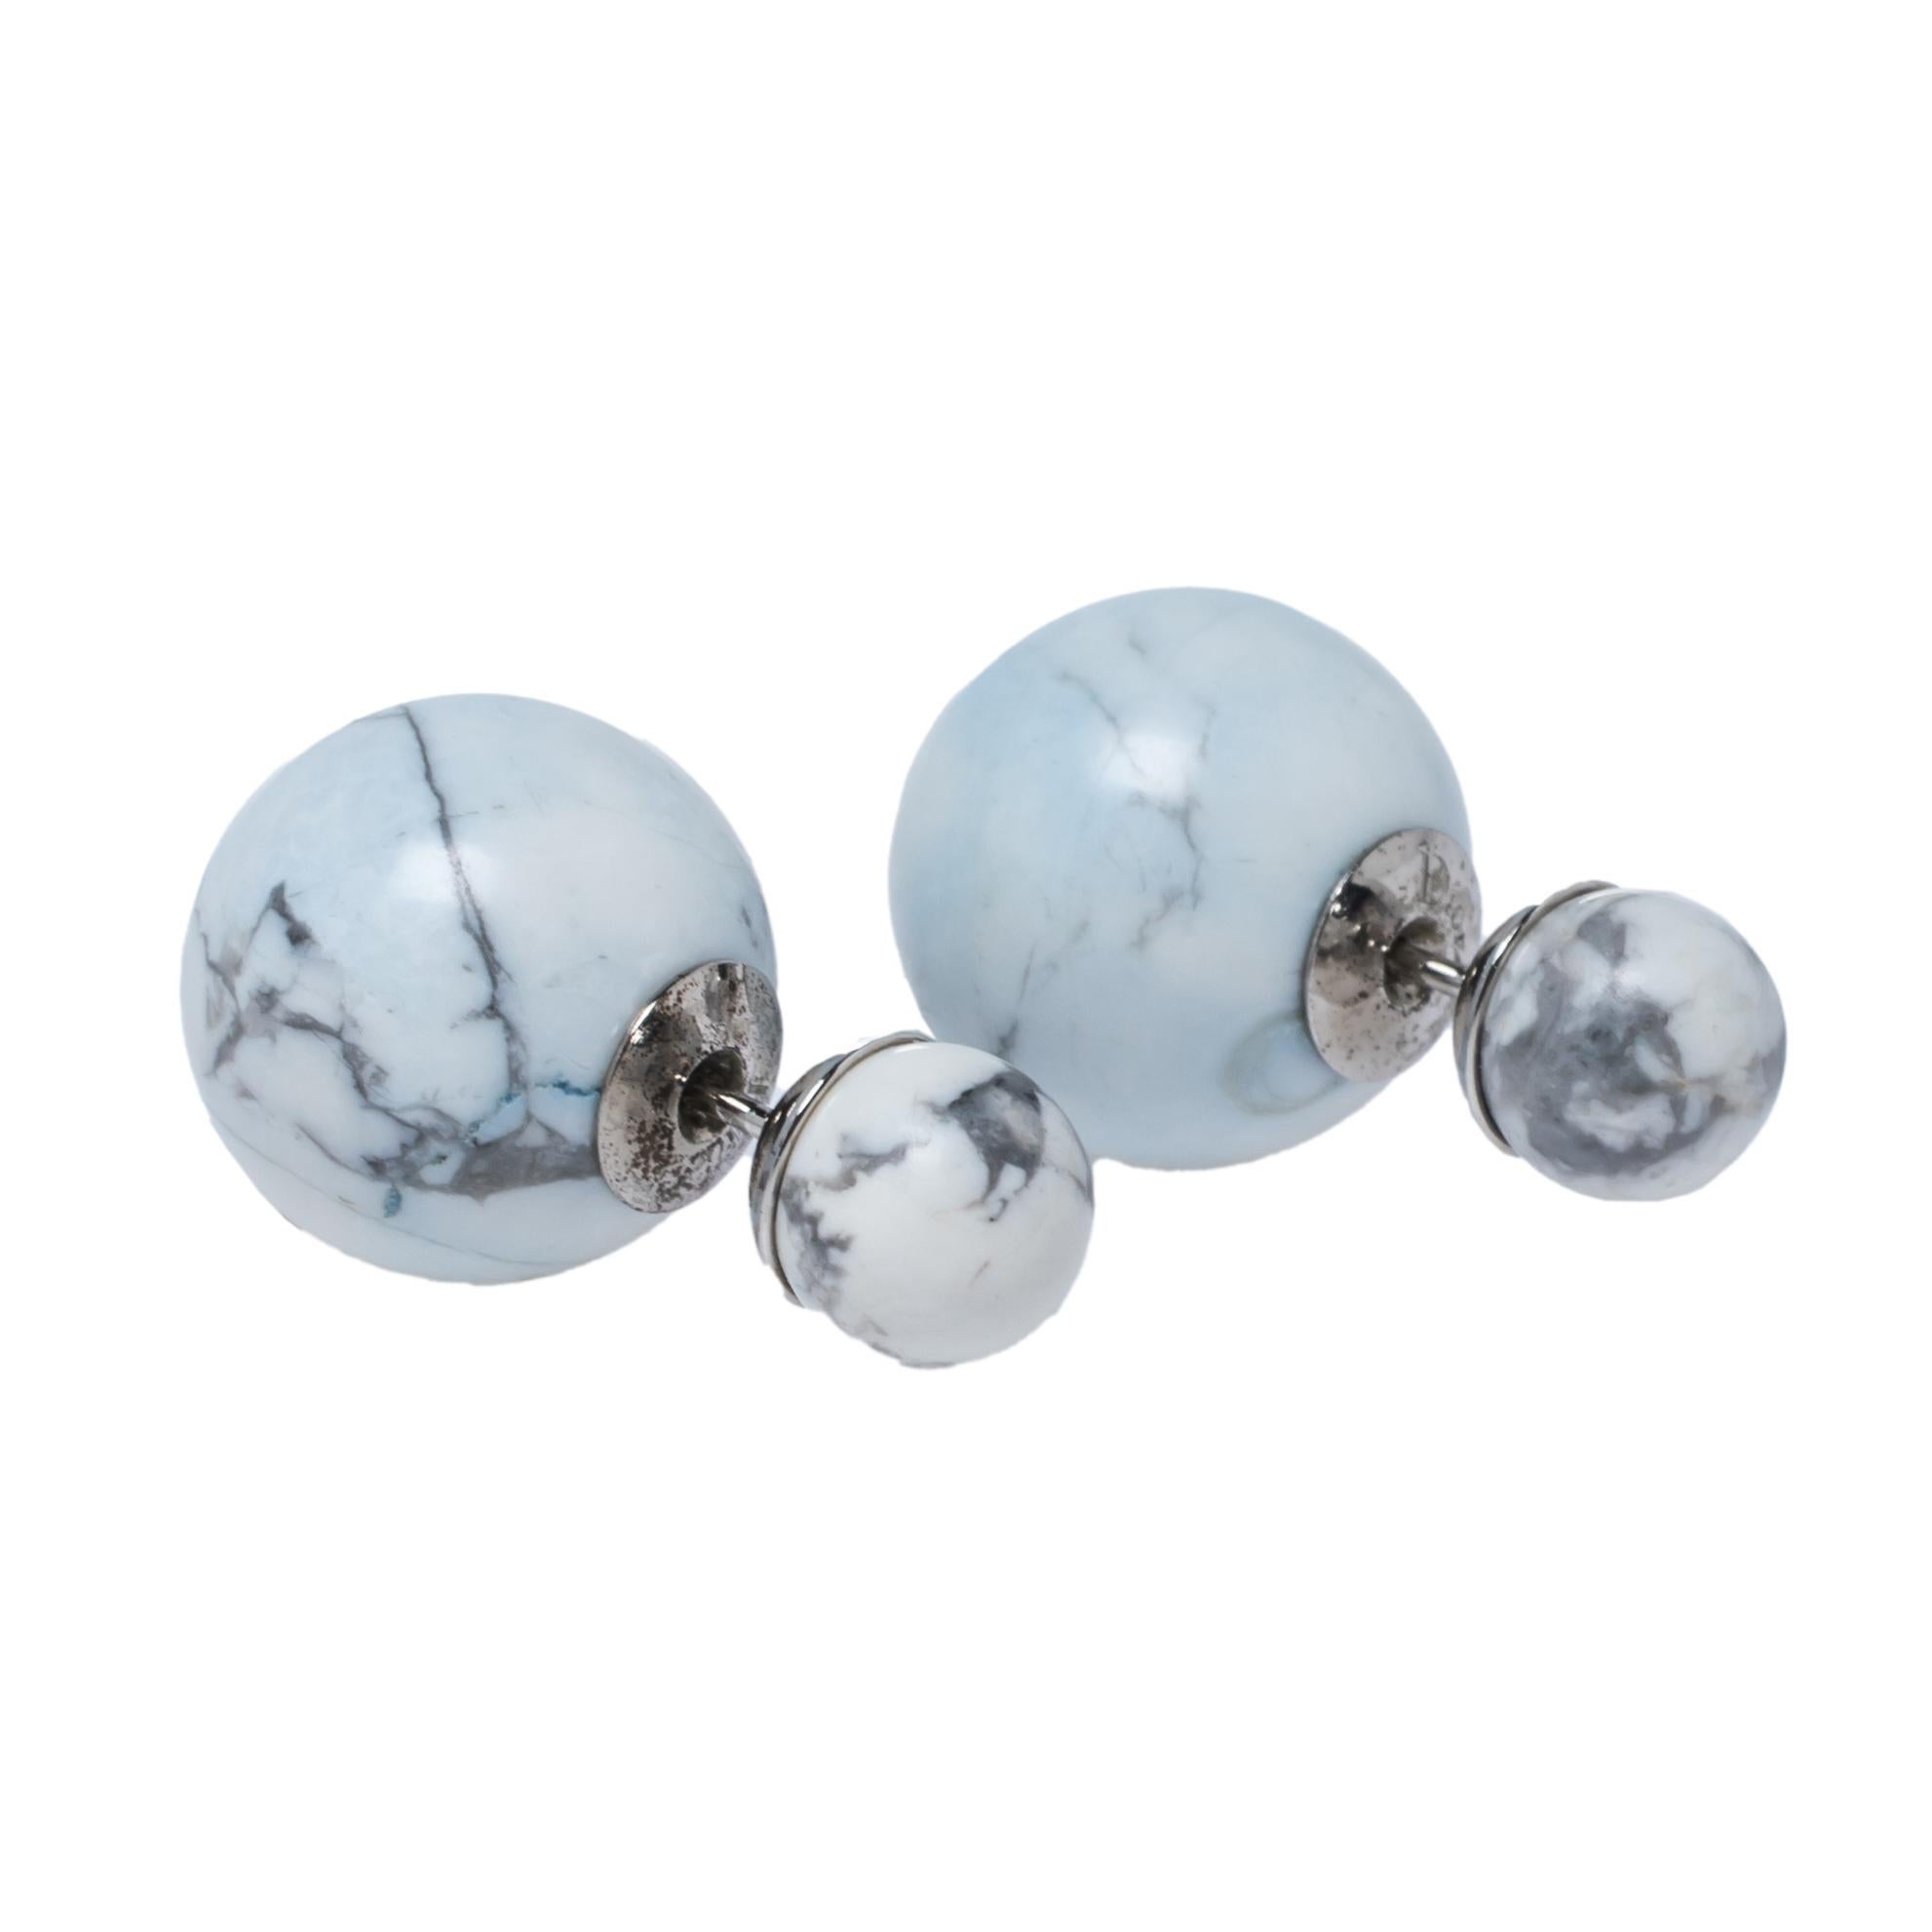 These Tribales stud earrings by Dior flaunt a stylish and luxurious appearance and come in ivory and blue hues. These earrings showcase a small stud that sits on the ear while the larger one peeks out from behind the lobe. They are detailed with a